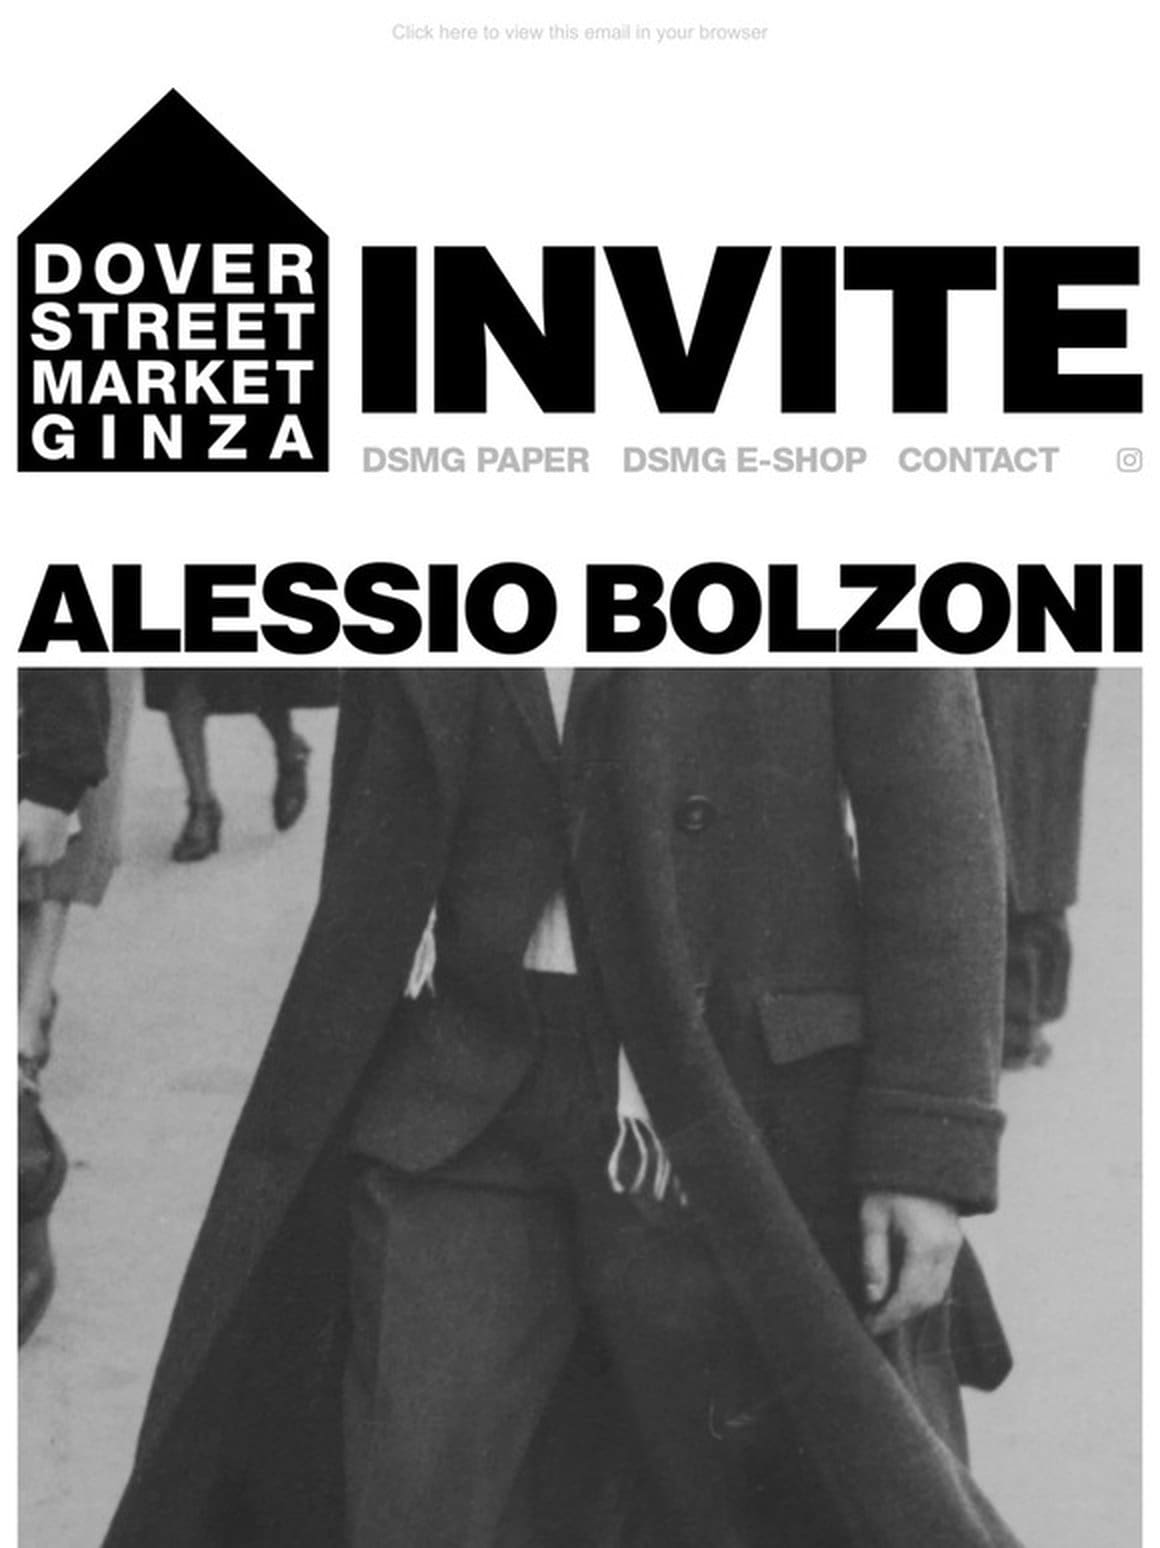 Alessio Bolzoni book signing at Dover Street Market Ginza